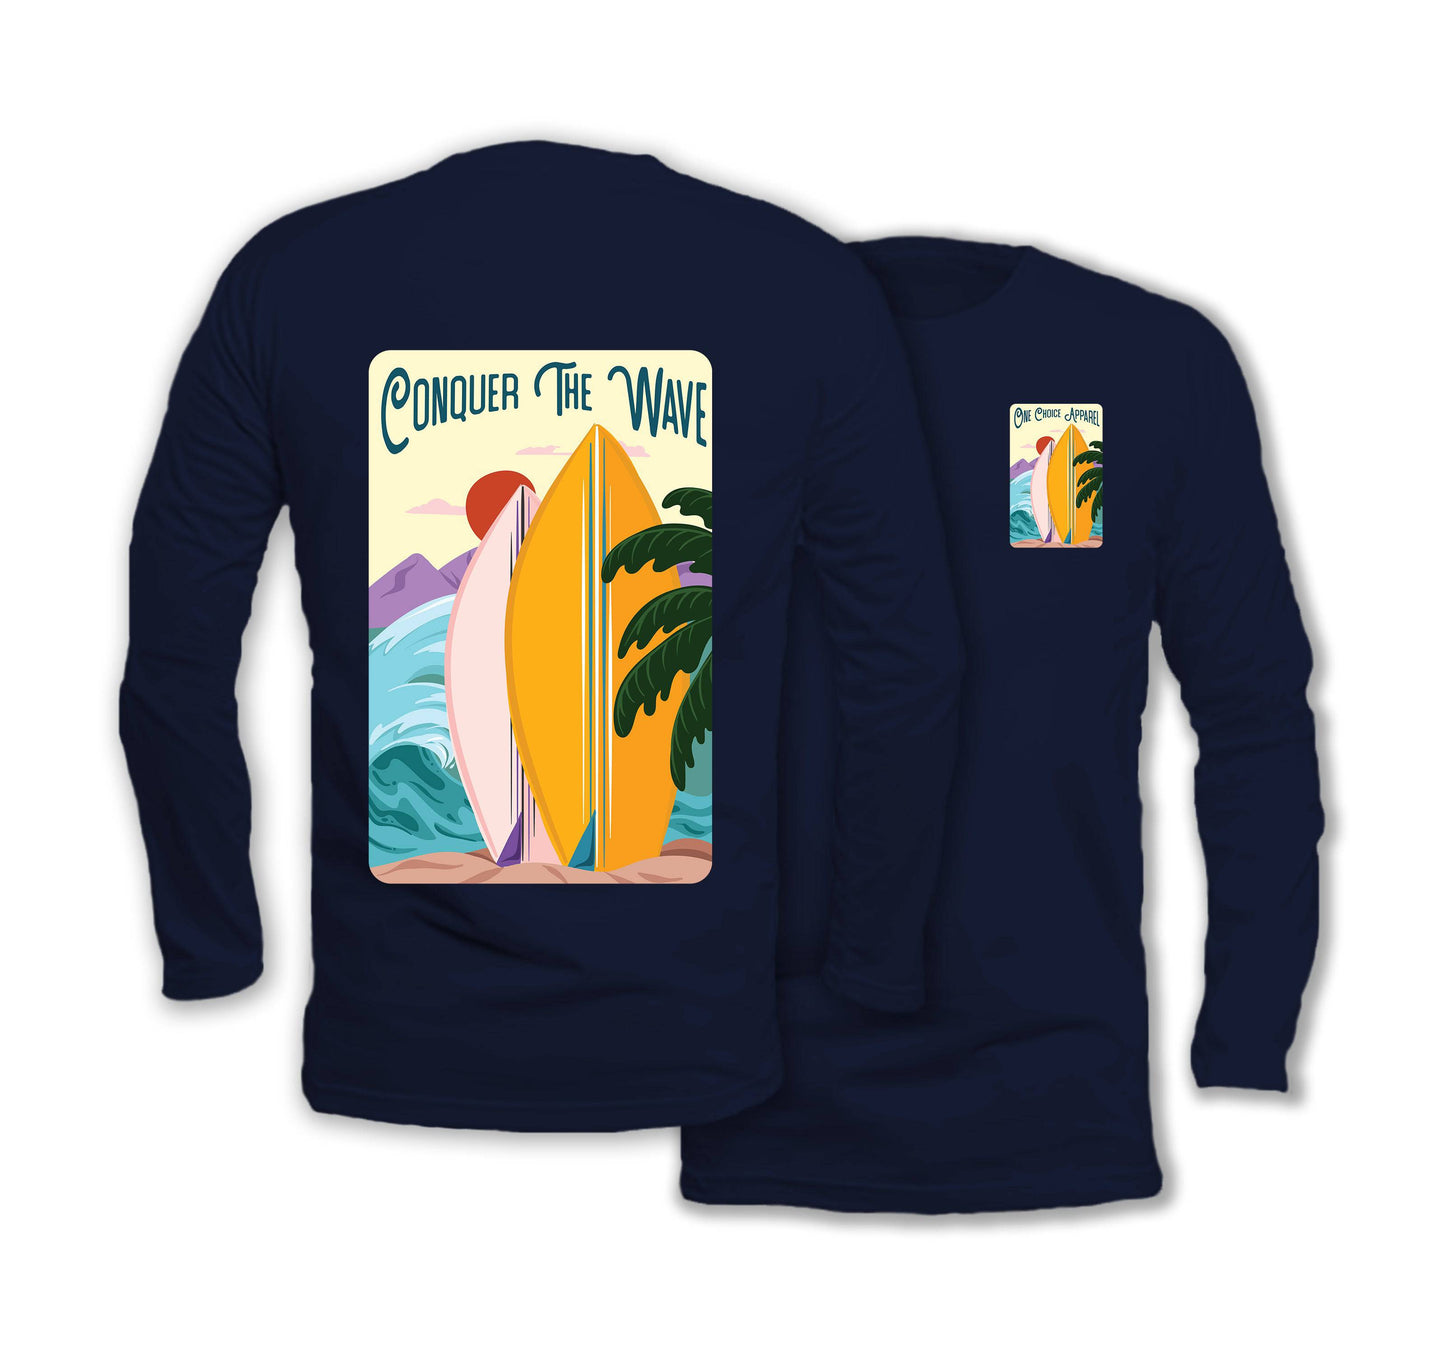 Conquer The Wave - Long Sleeve Organic Cotton T-Shirt - One Choice Apparel